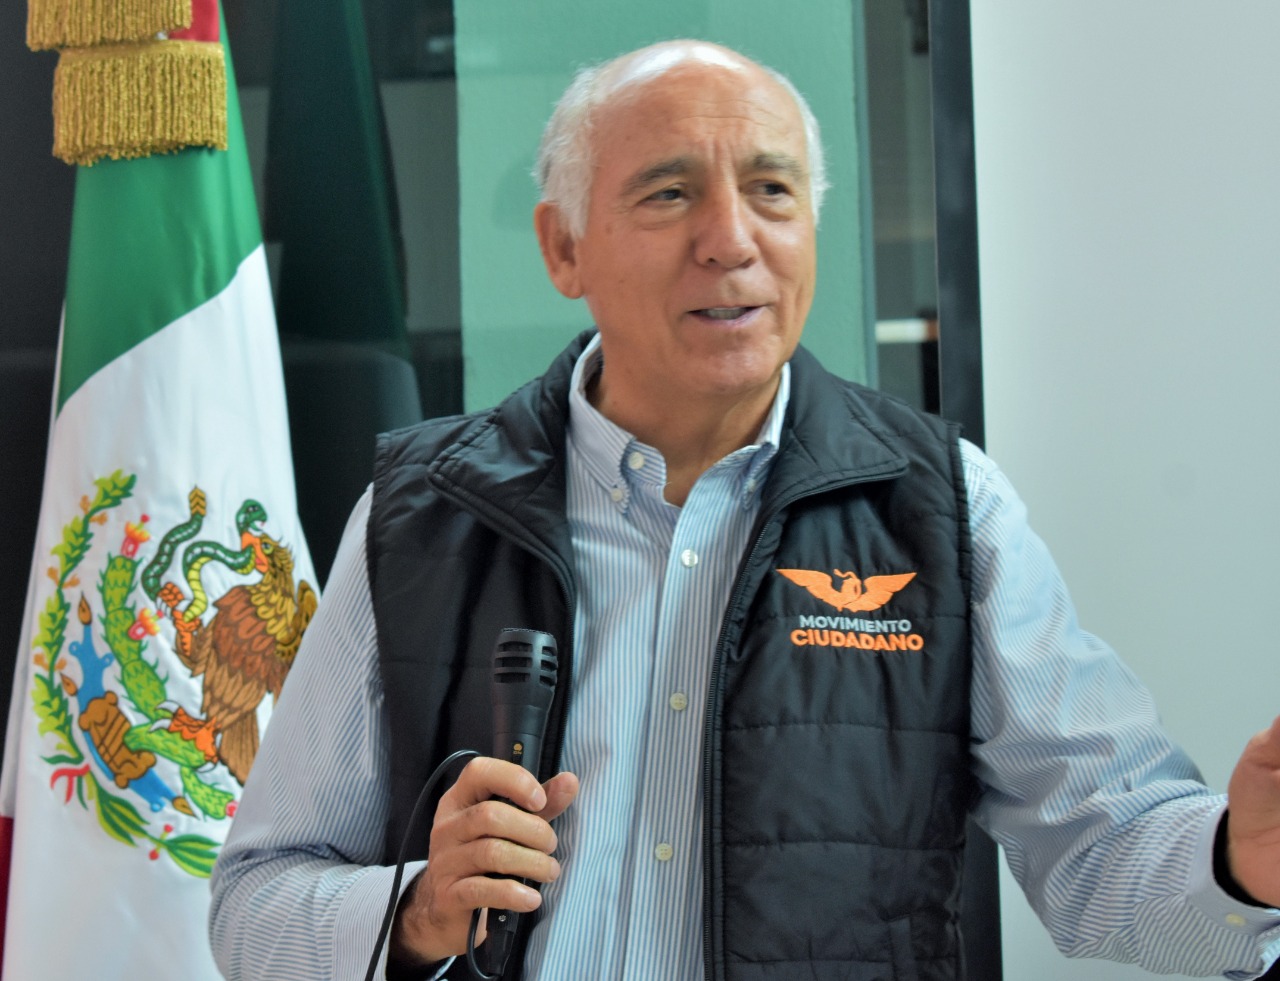 Movimiento Ciudadano rejects Fox's irrational and foolish closure, and we bet on responsible dialogue: Luis Manuel Antúnez